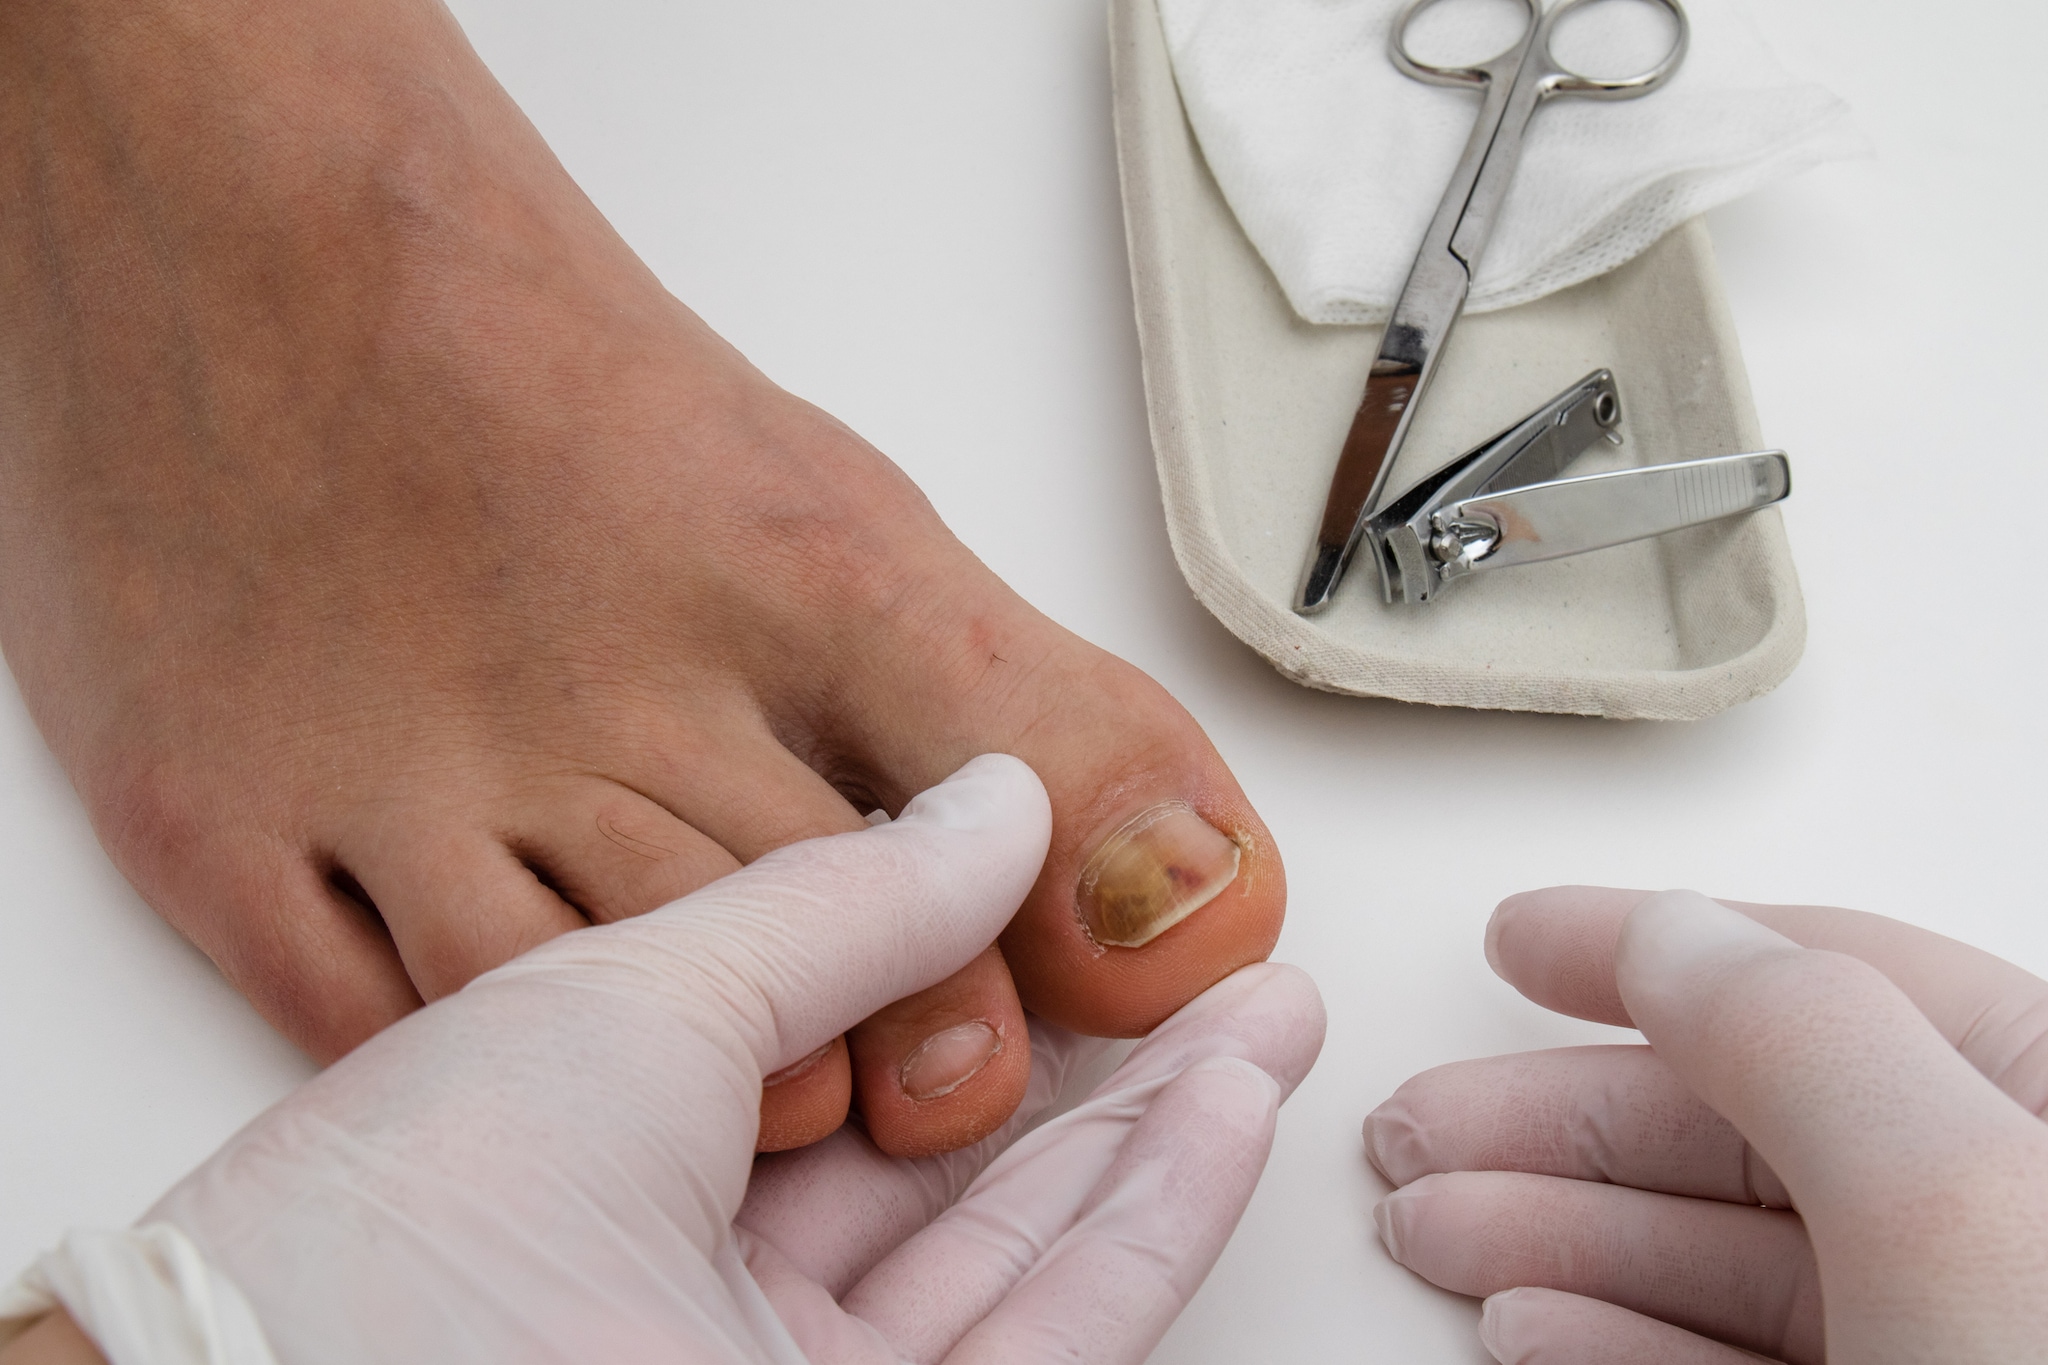 Stock image of two gloved hands treating a fungal nail infection on a toe nail.